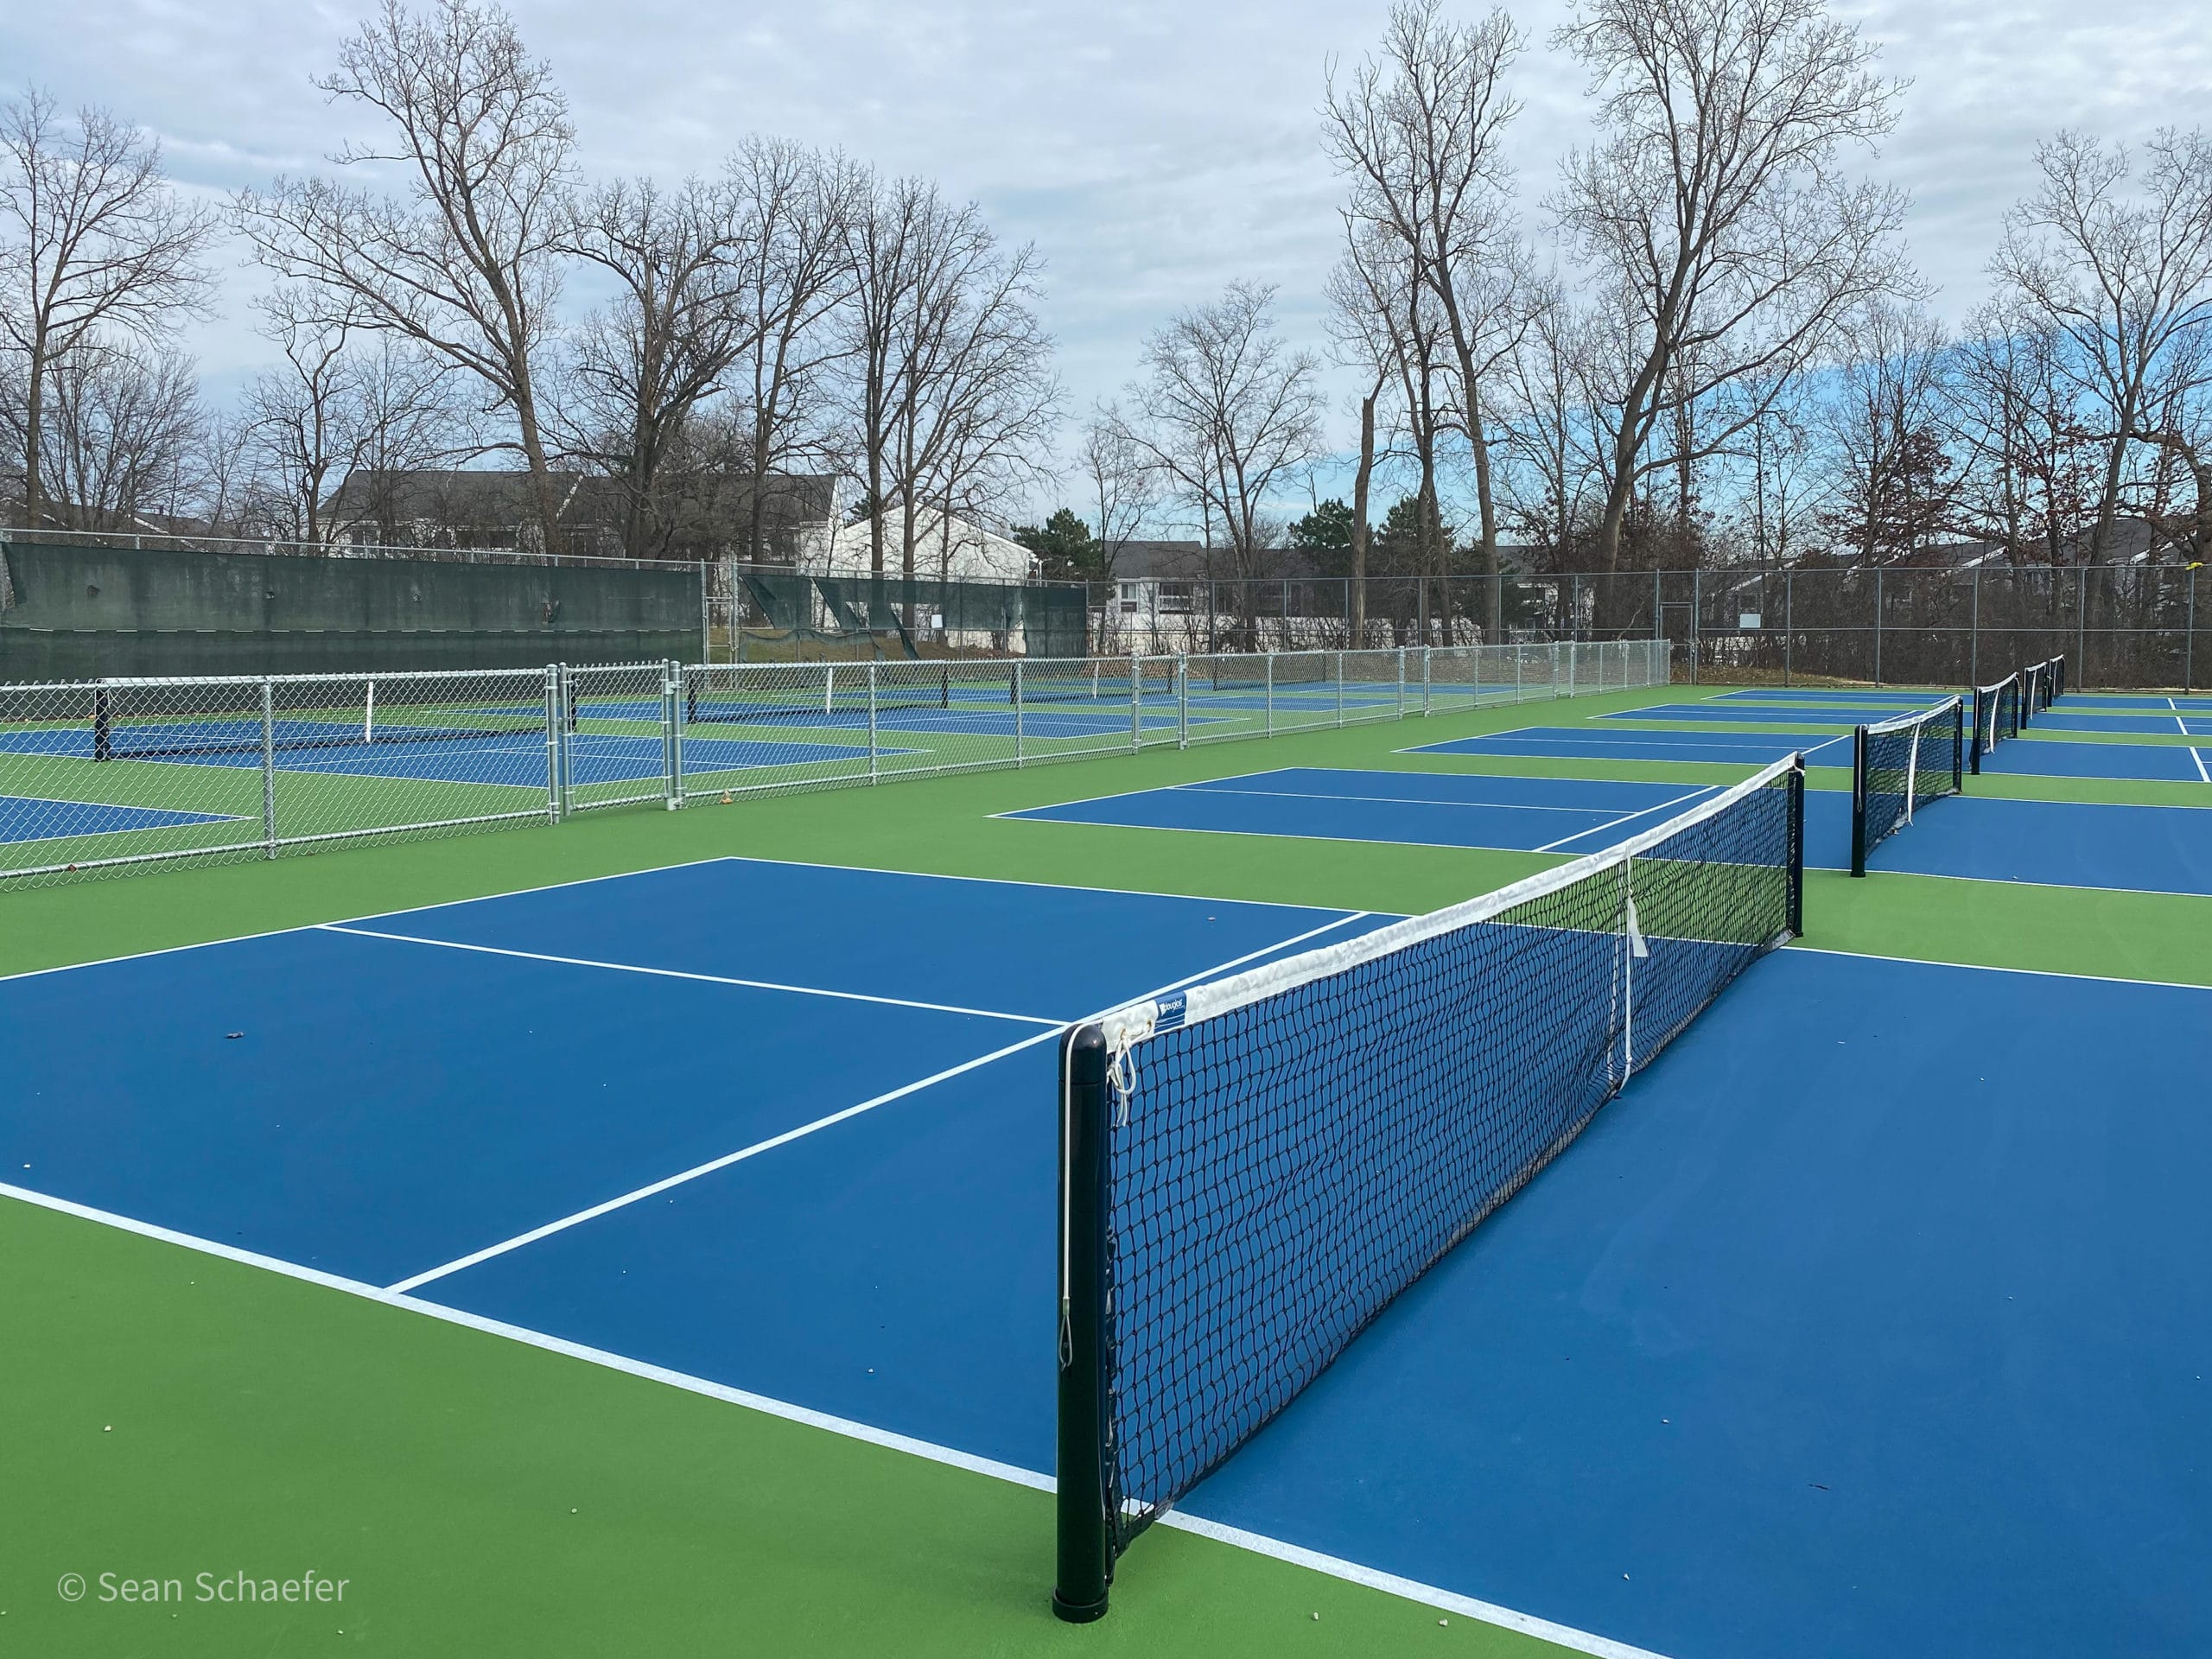 Image of pickle ball courts in Metro Detroit, Michigan